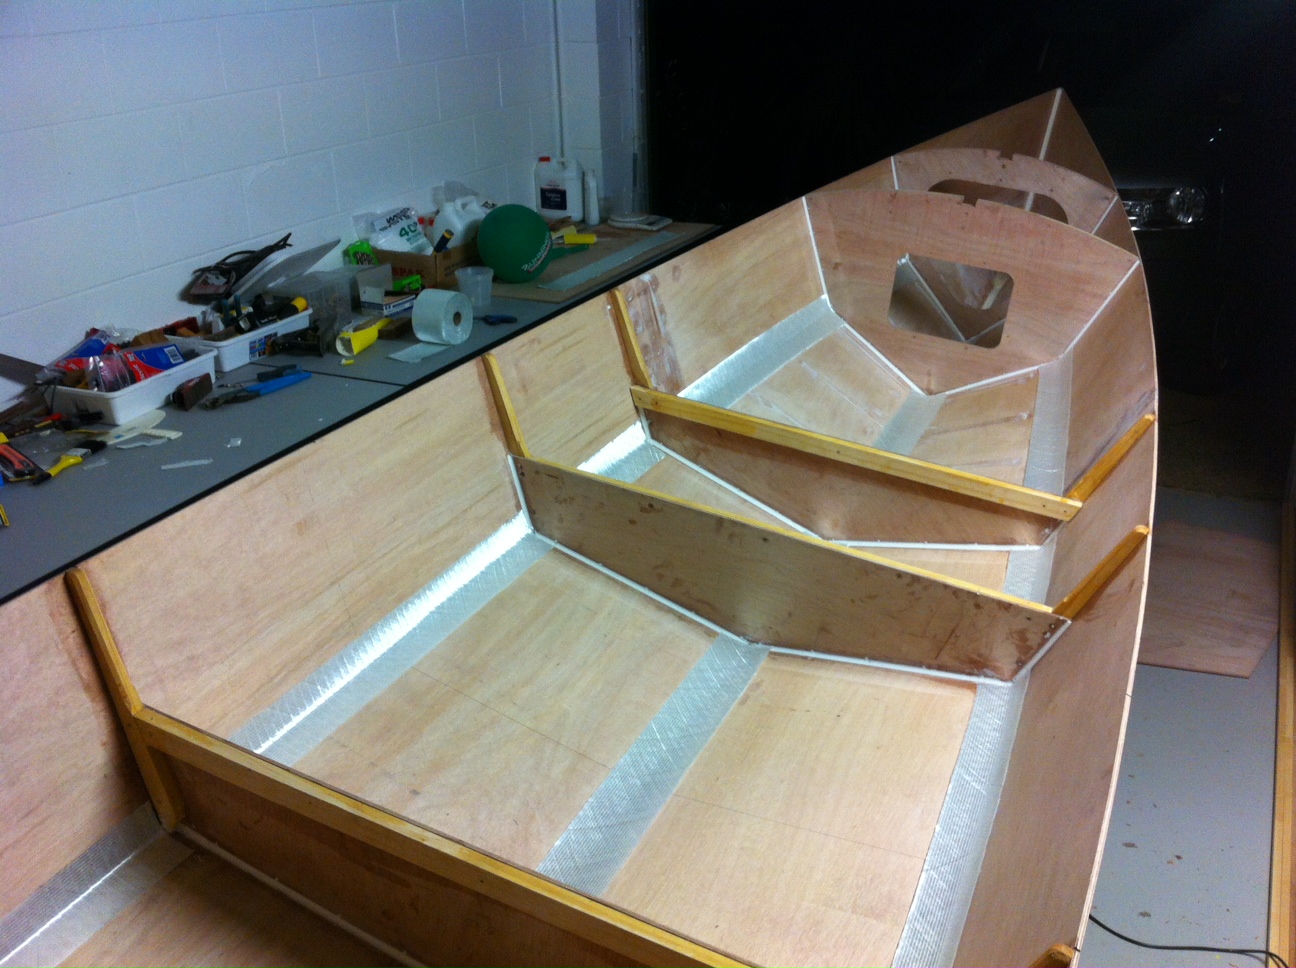  Lillistone Wooden Boats: Glued-Lapstrake (Clinker) - Another Approach